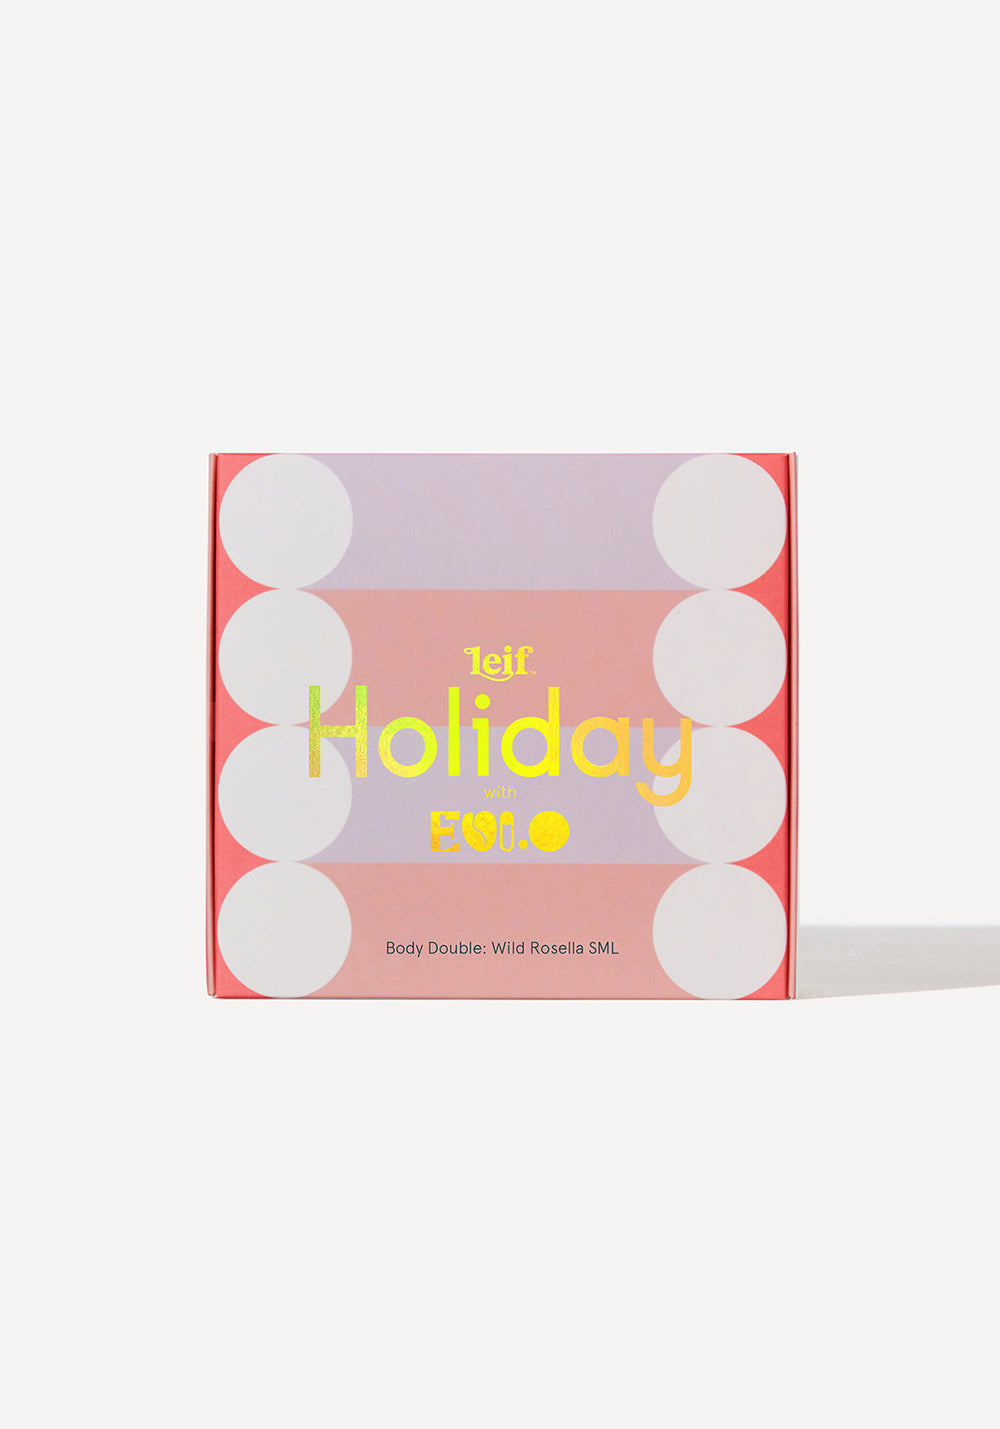 LIMITED EDITION 'HOLIDAY WITH EVI O' BODY DOUBLE WILD ROSELLA SML